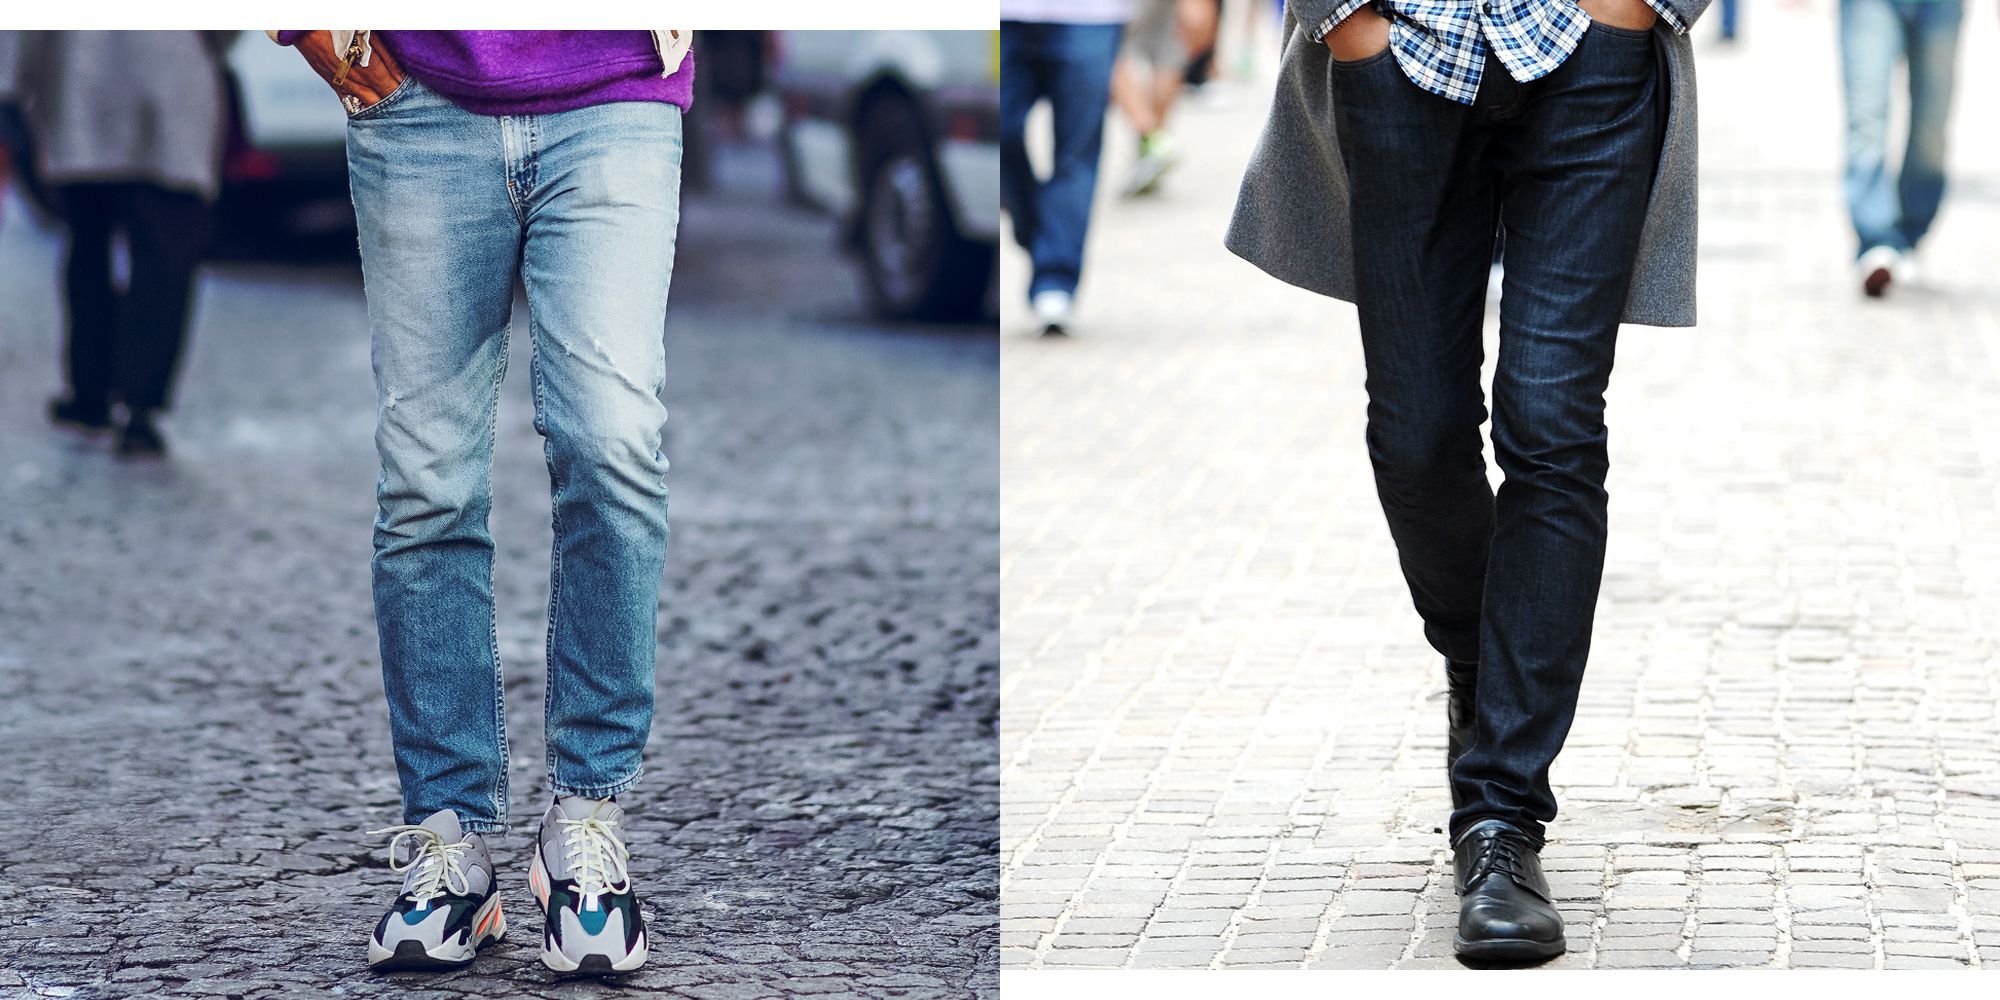 What Makes a Great Pair of Jeans Great?